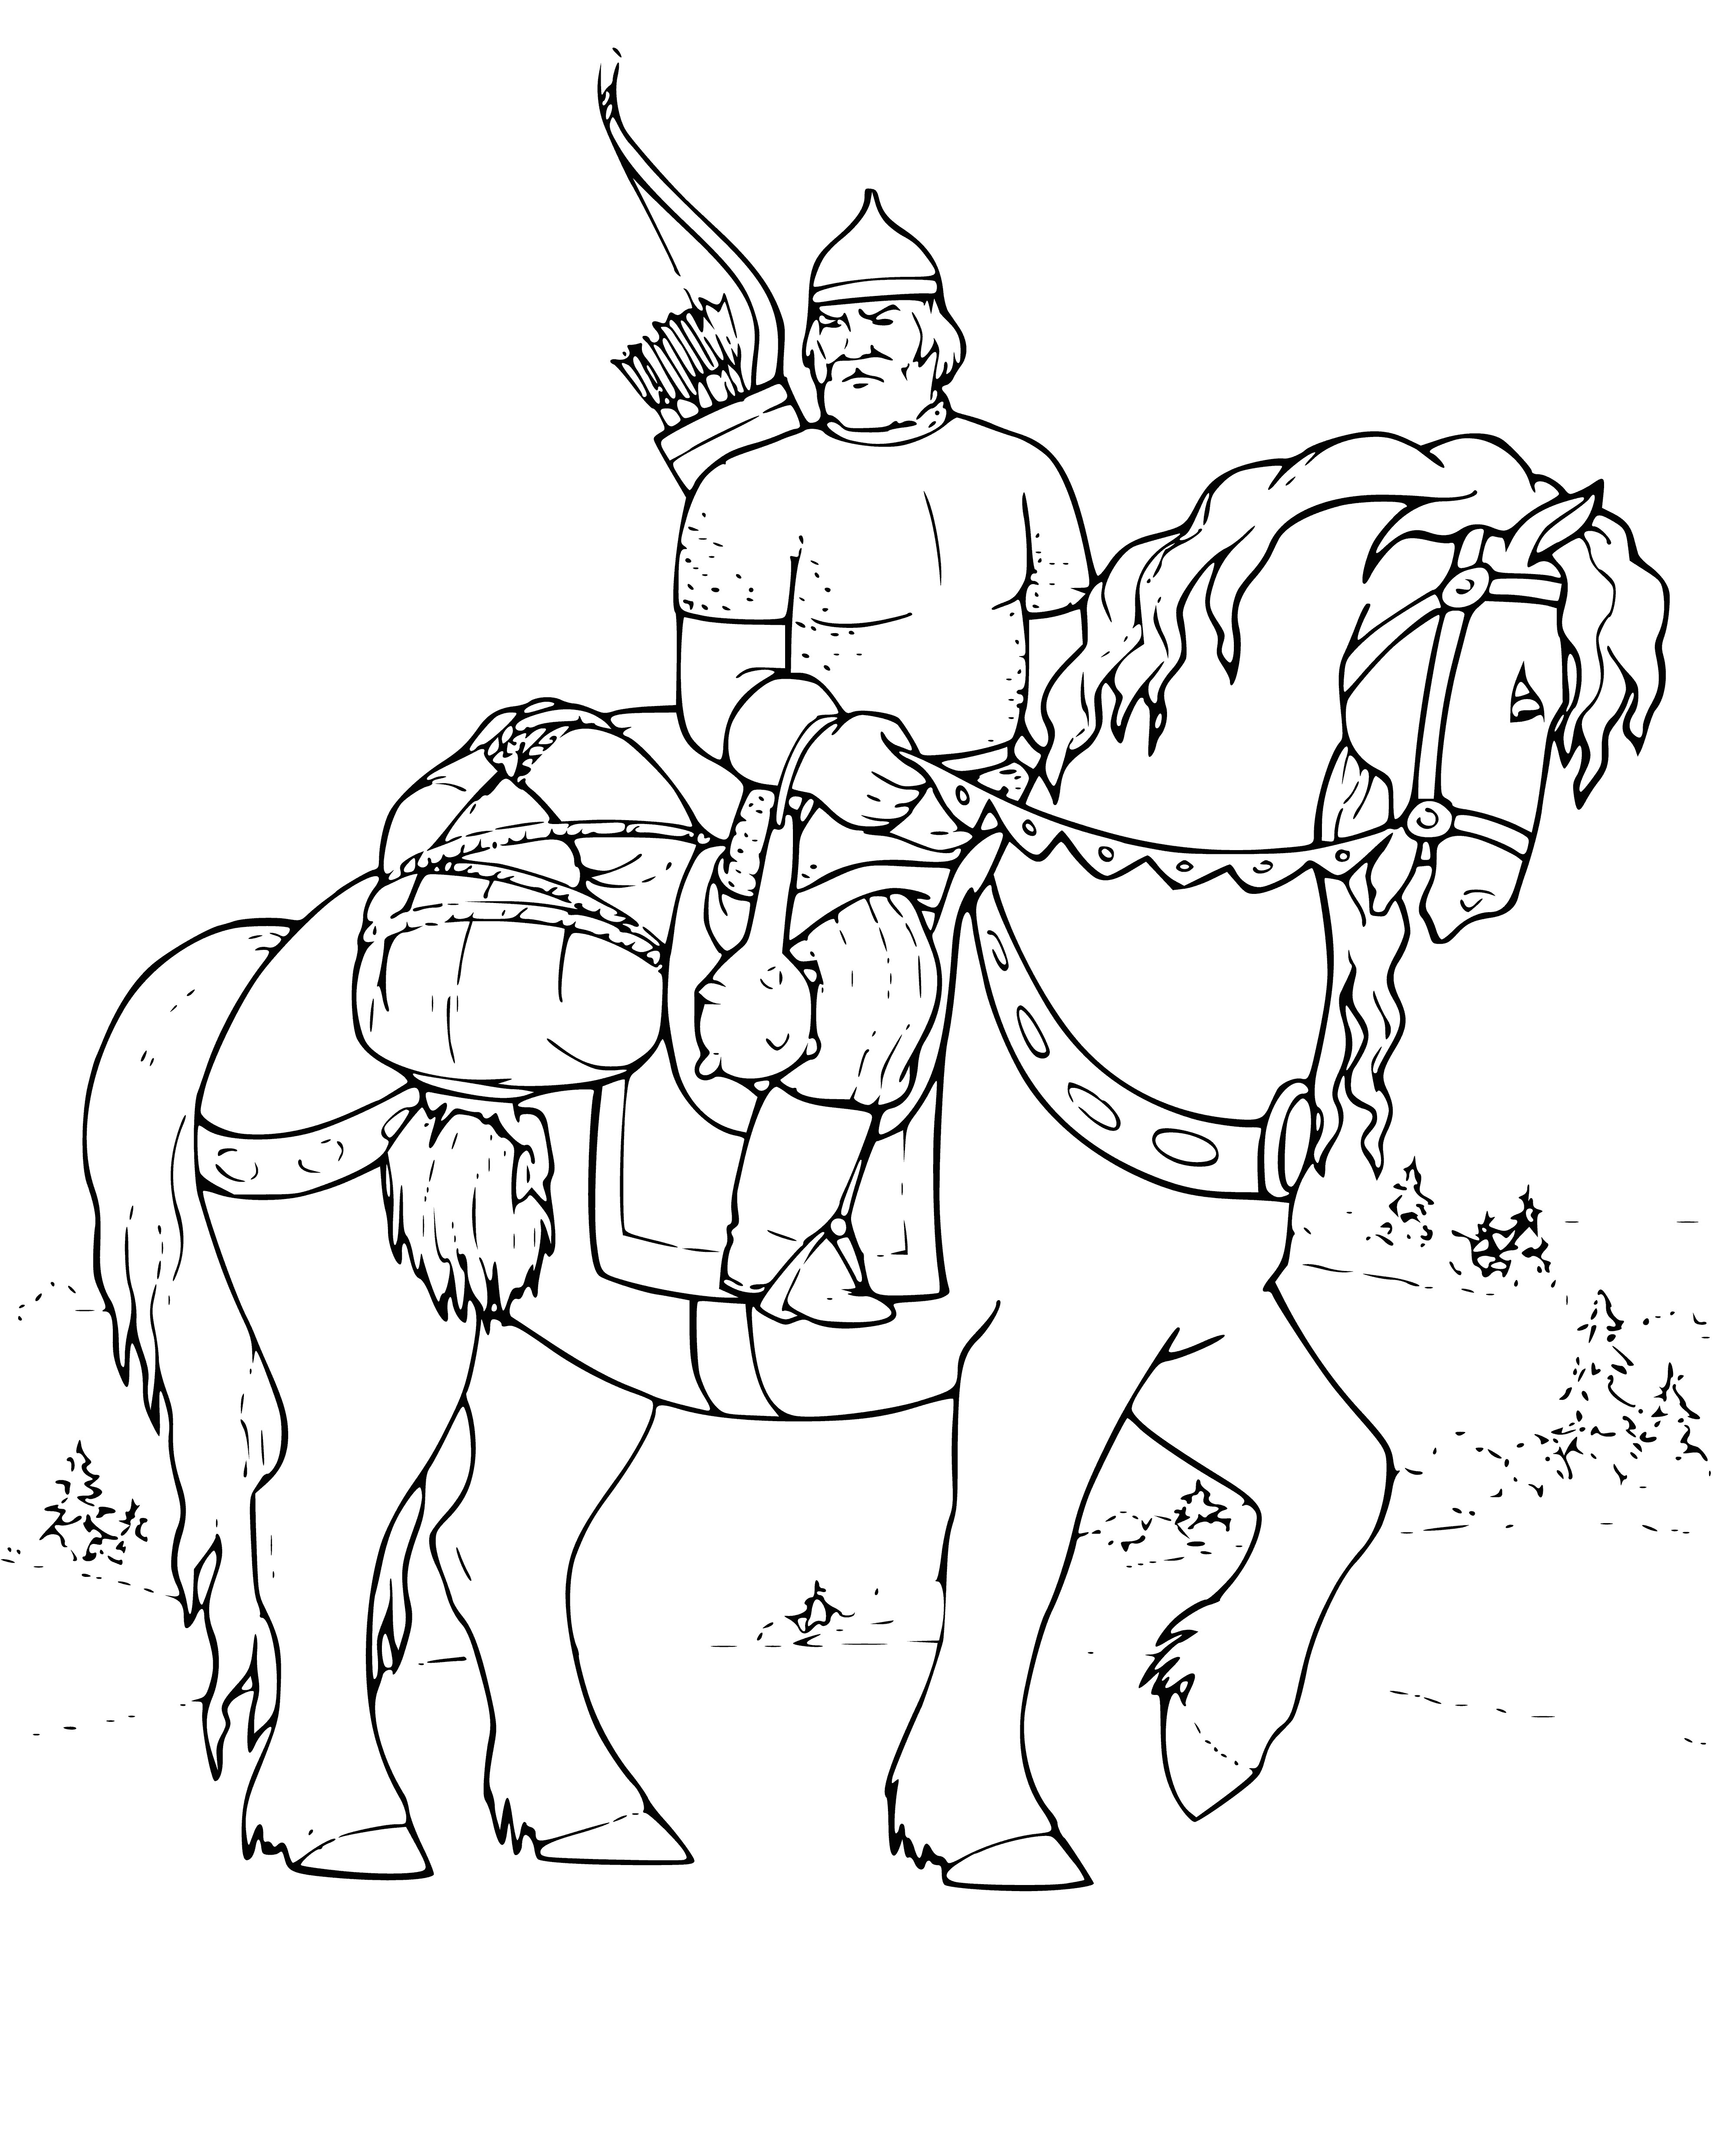 Bogatyr coloring page